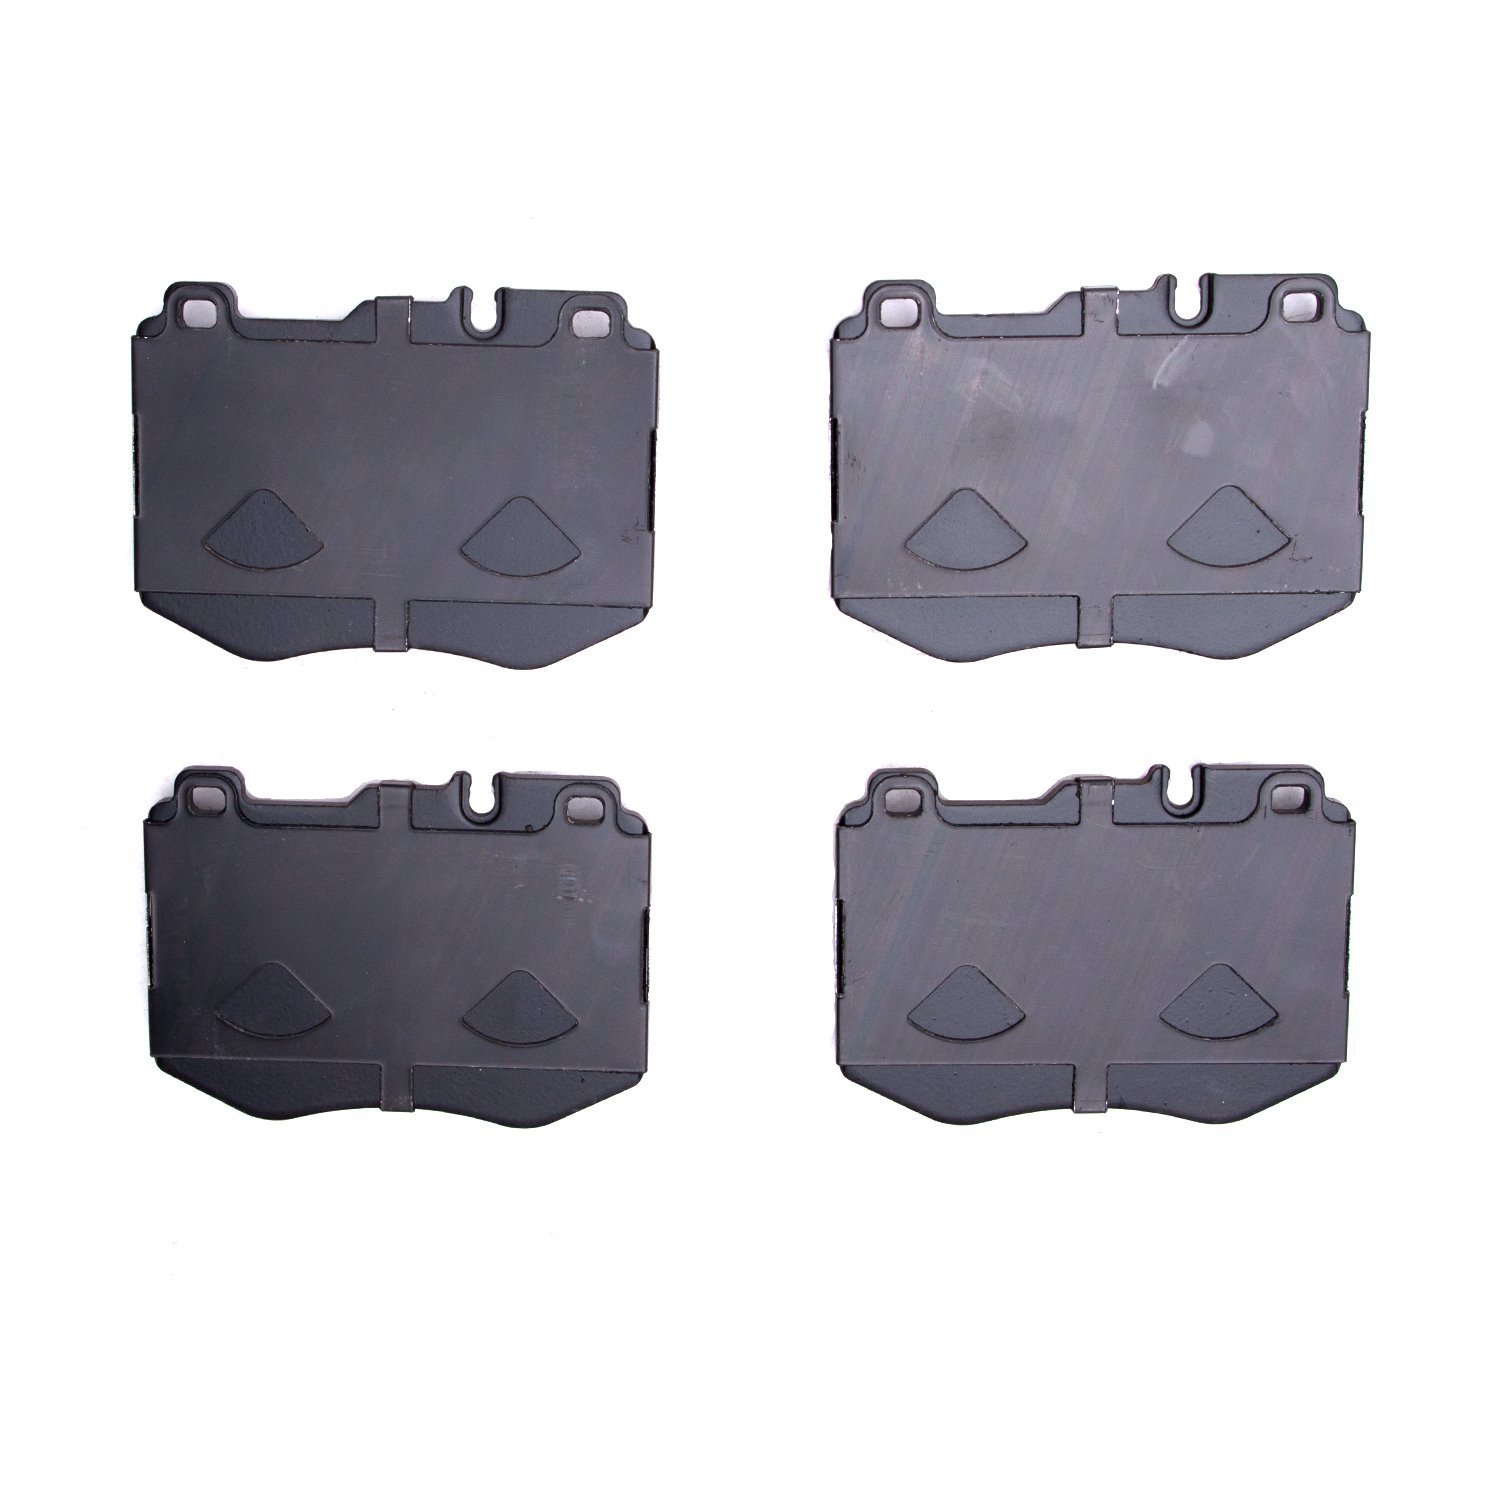 1310-1796-00 3000-Series Ceramic Brake Pads, Fits Select Mercedes-Benz, Position: Front